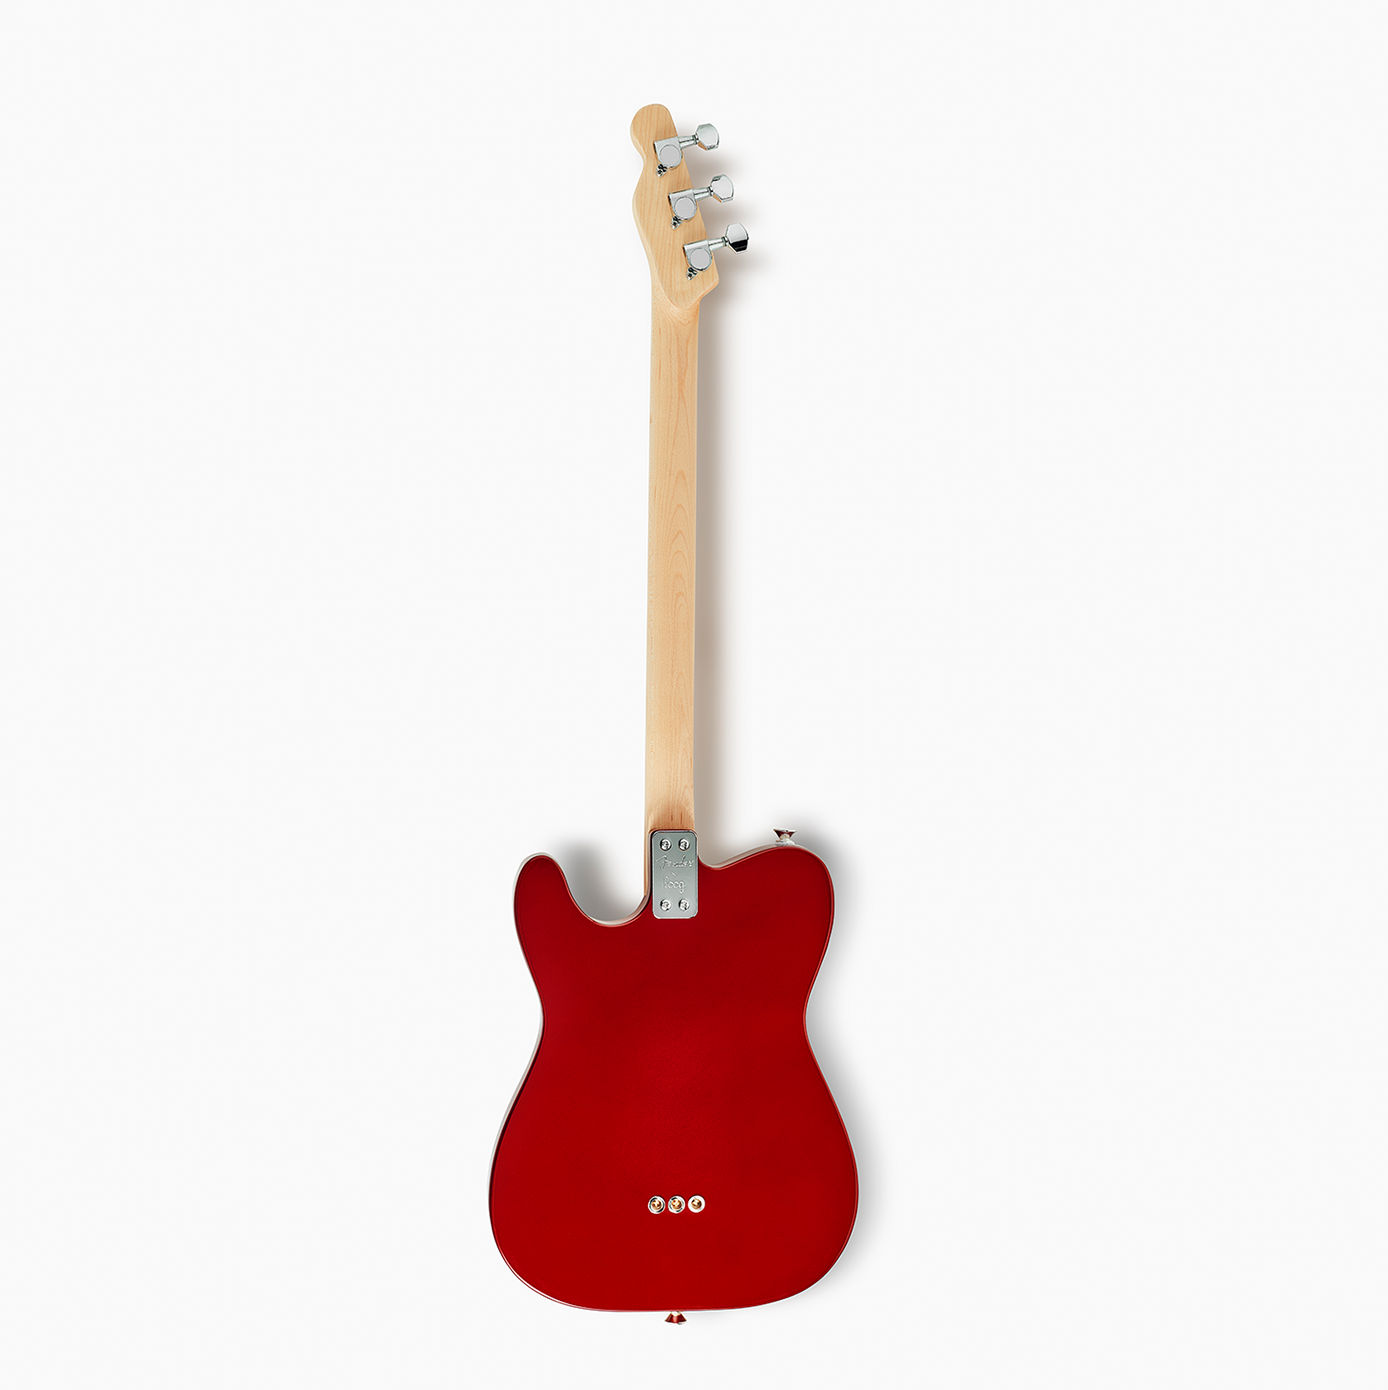 candy-apple-red telecaster candy apple red candy-apple-red-telecaster telecaster-candy-apple-red